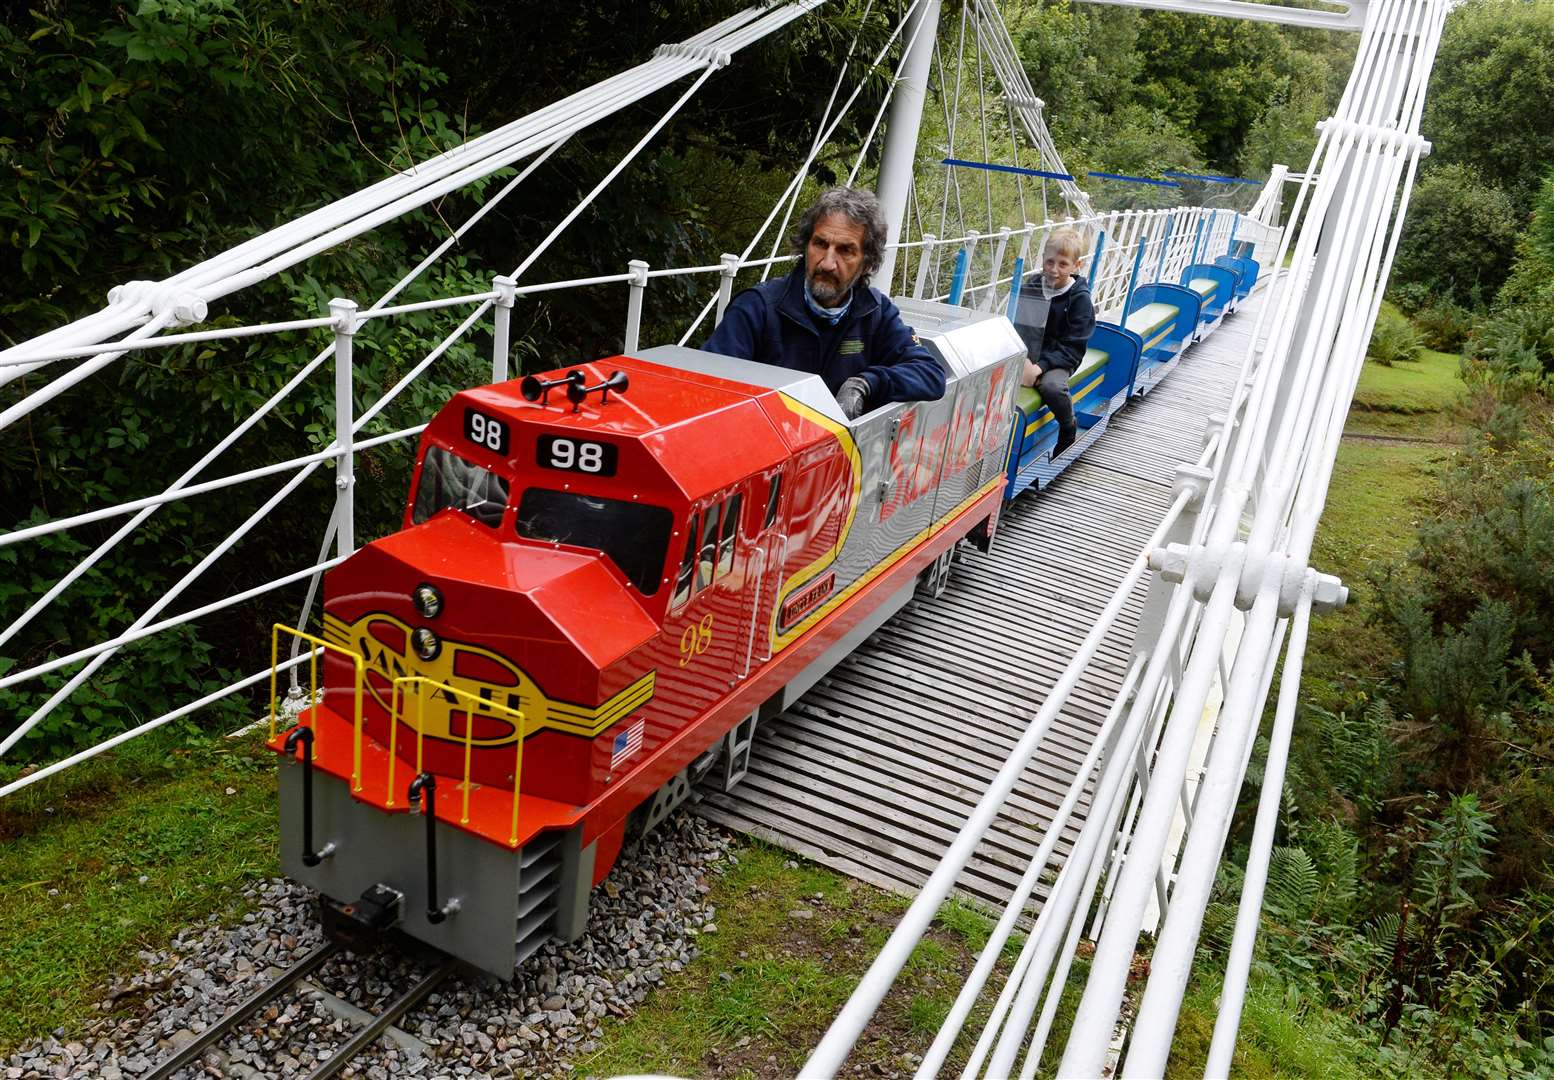 The miniature railway at Whin Park, which has been operated by Highland Hospice since April 2019, takes passengers on a half-mile circular route.